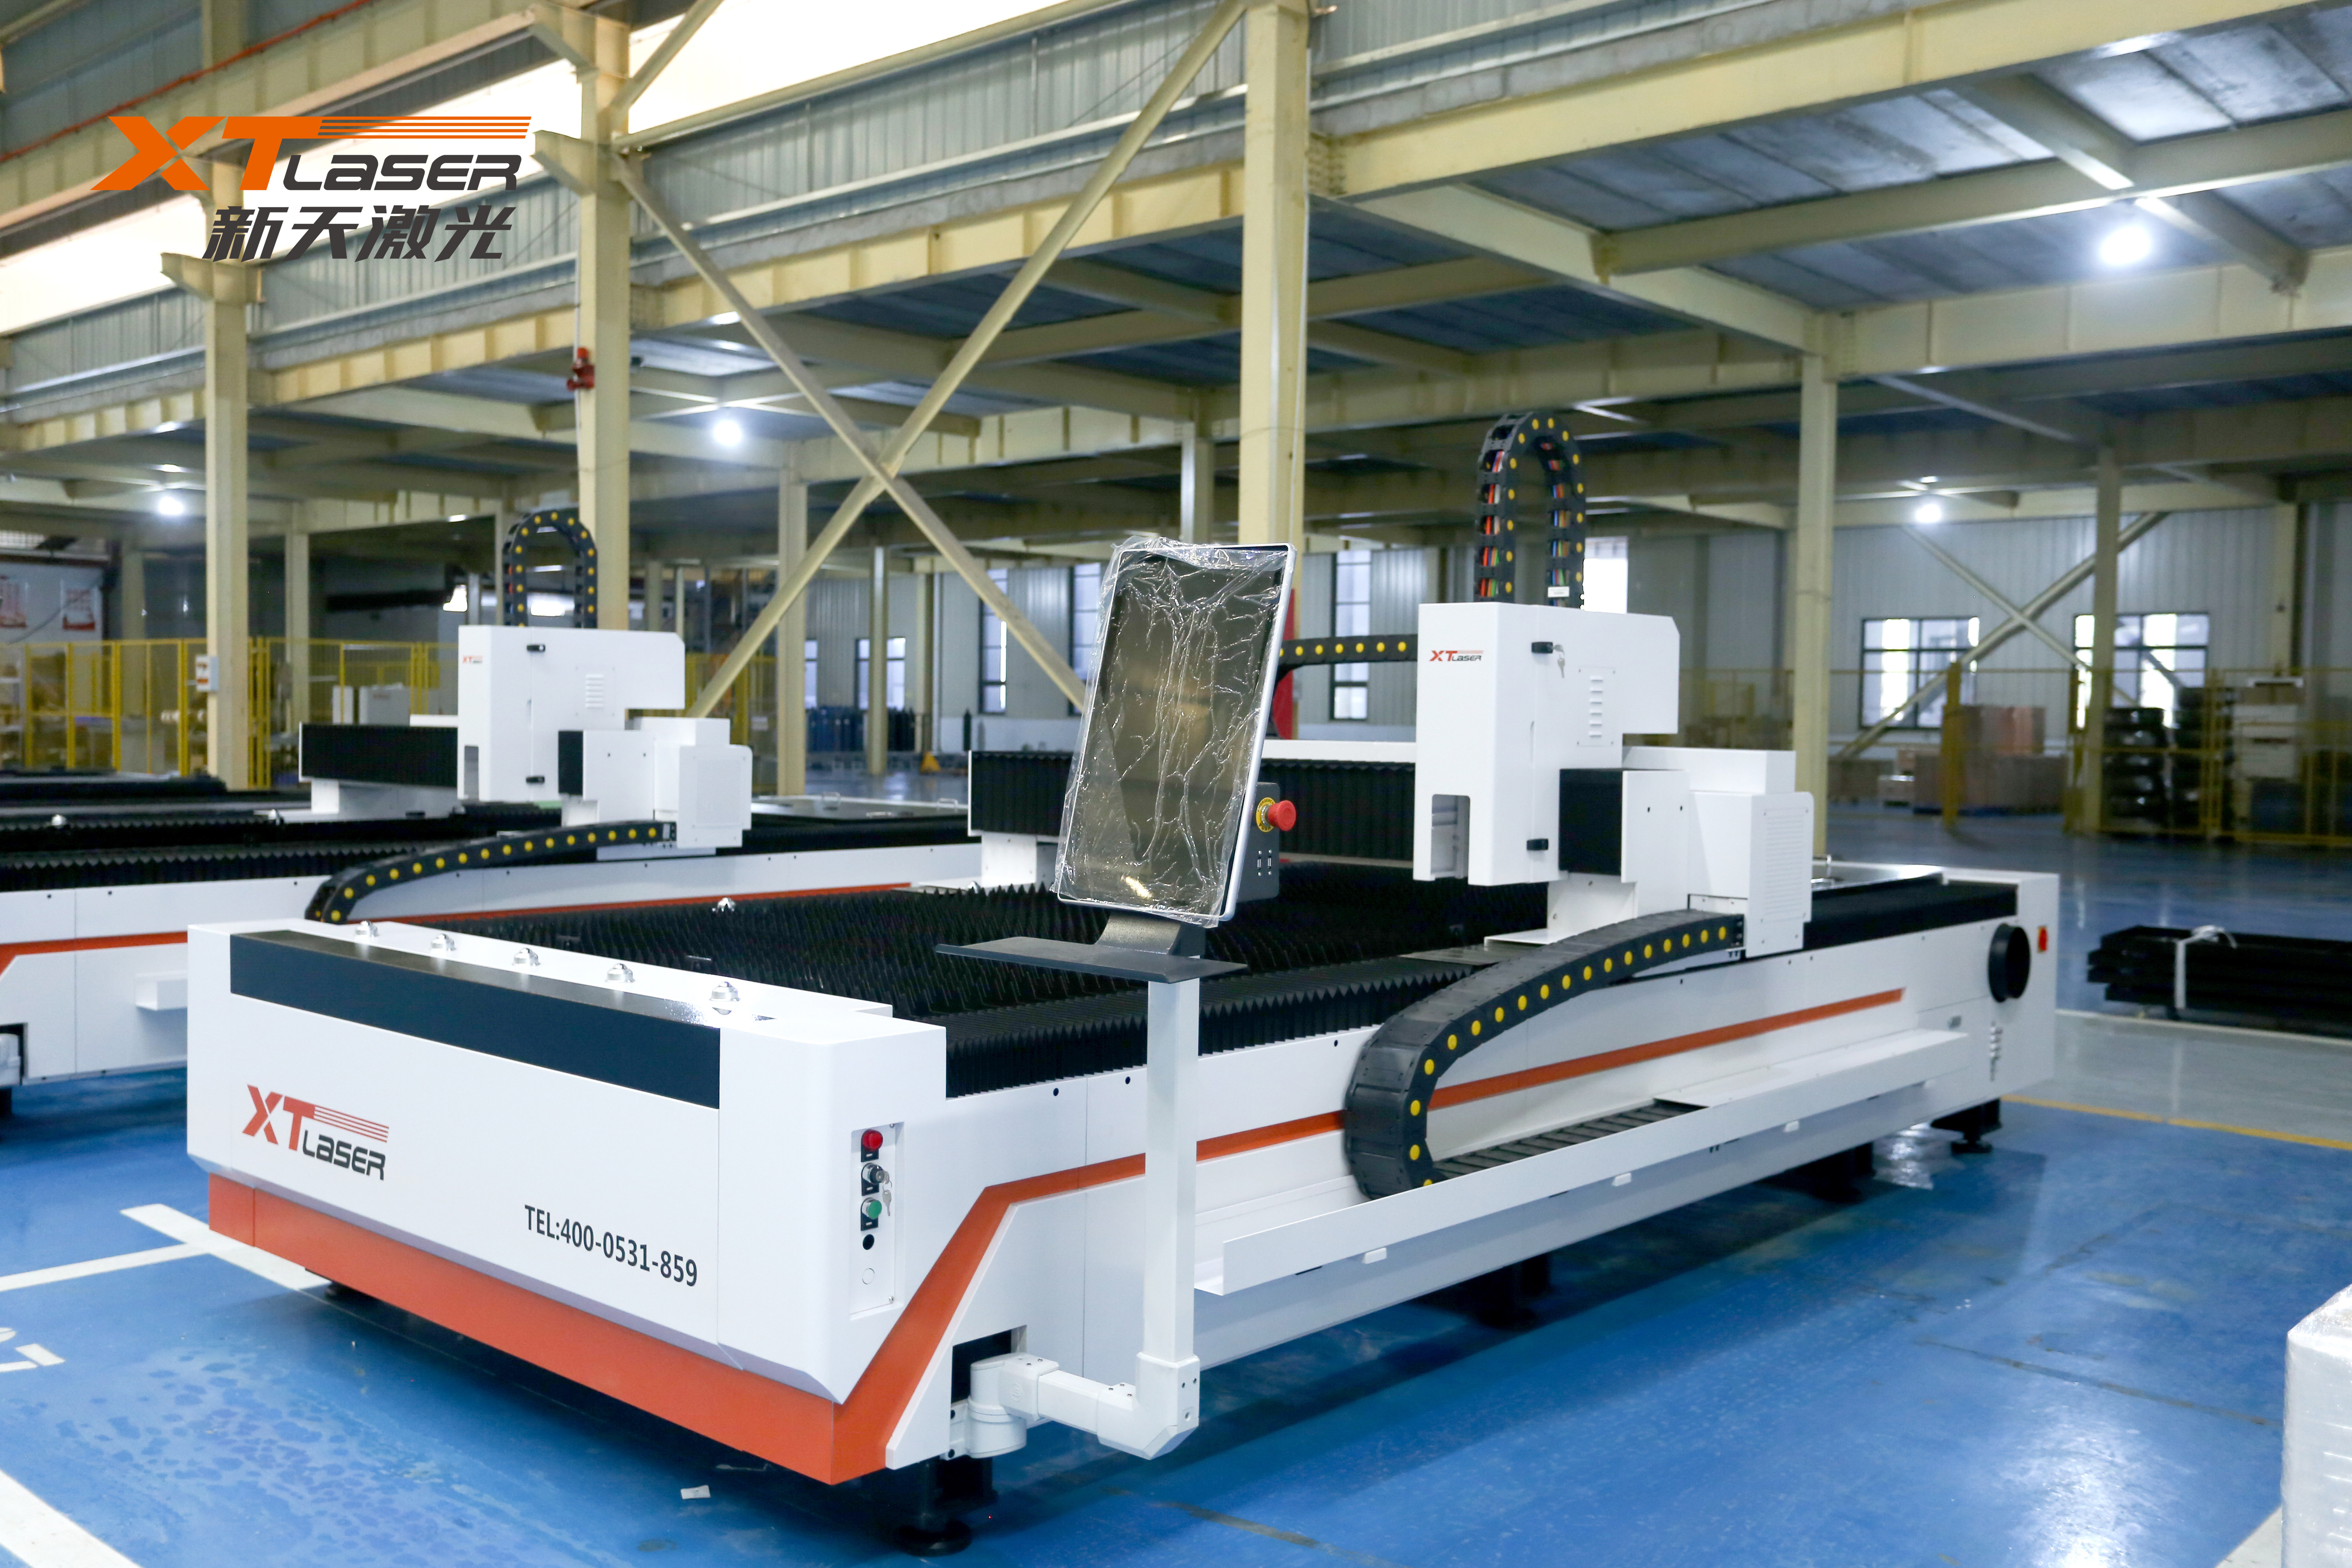 Laser cutting machines can be applied to mold manufacturing